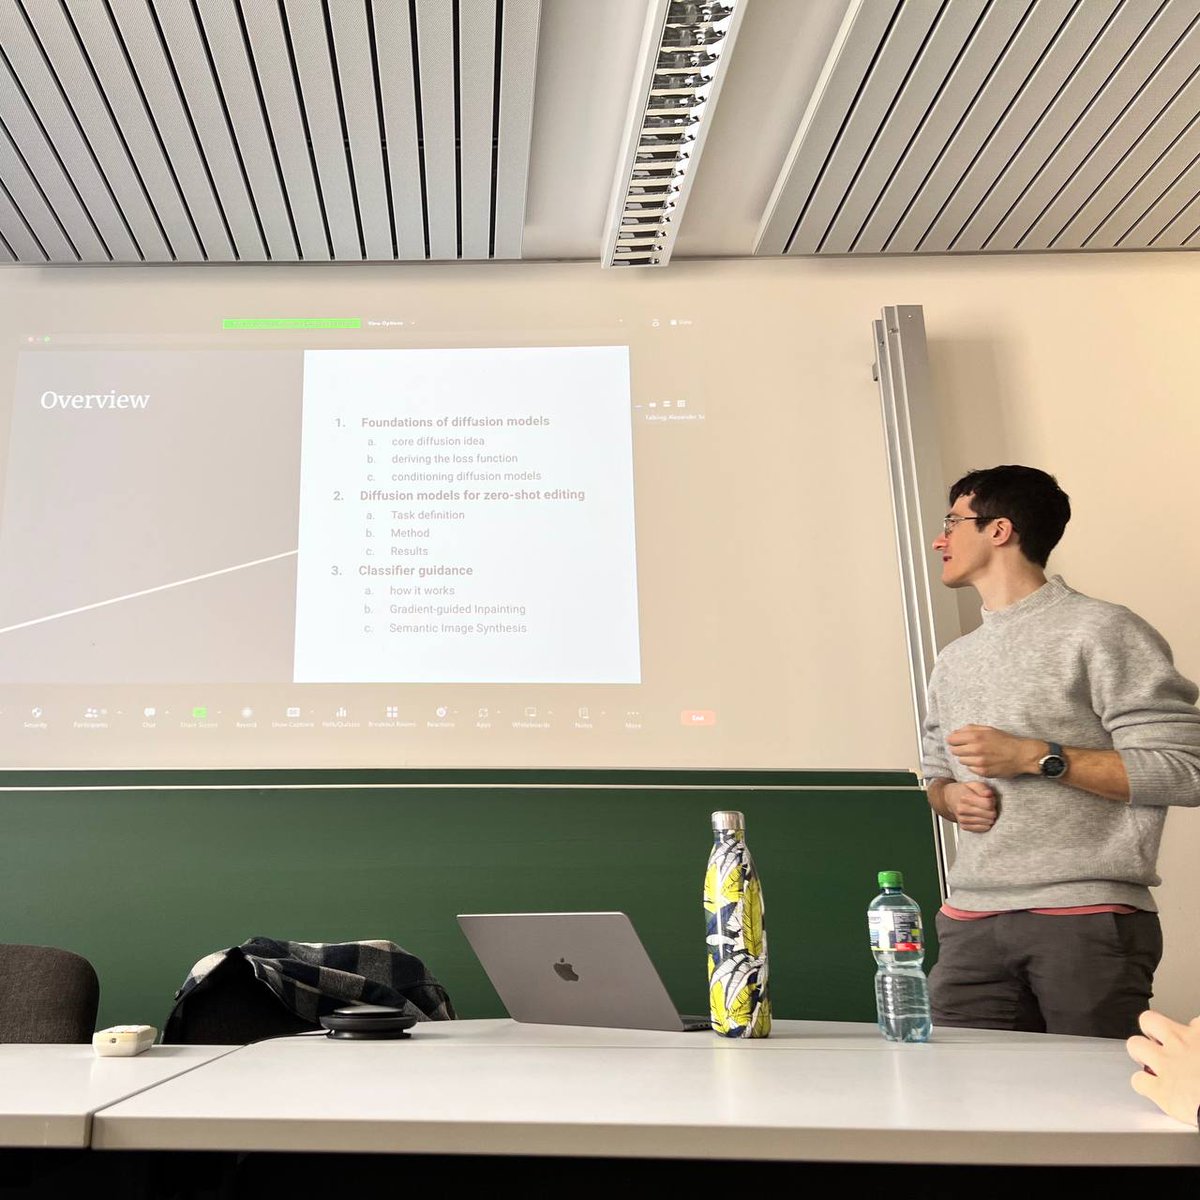 We were delighted to meet @gcouairon in our @HammerLabML! Guillaume gave an insightful talk on diffusion models, and it was a privilege to get a first-hand look at DiffEdit from its author!